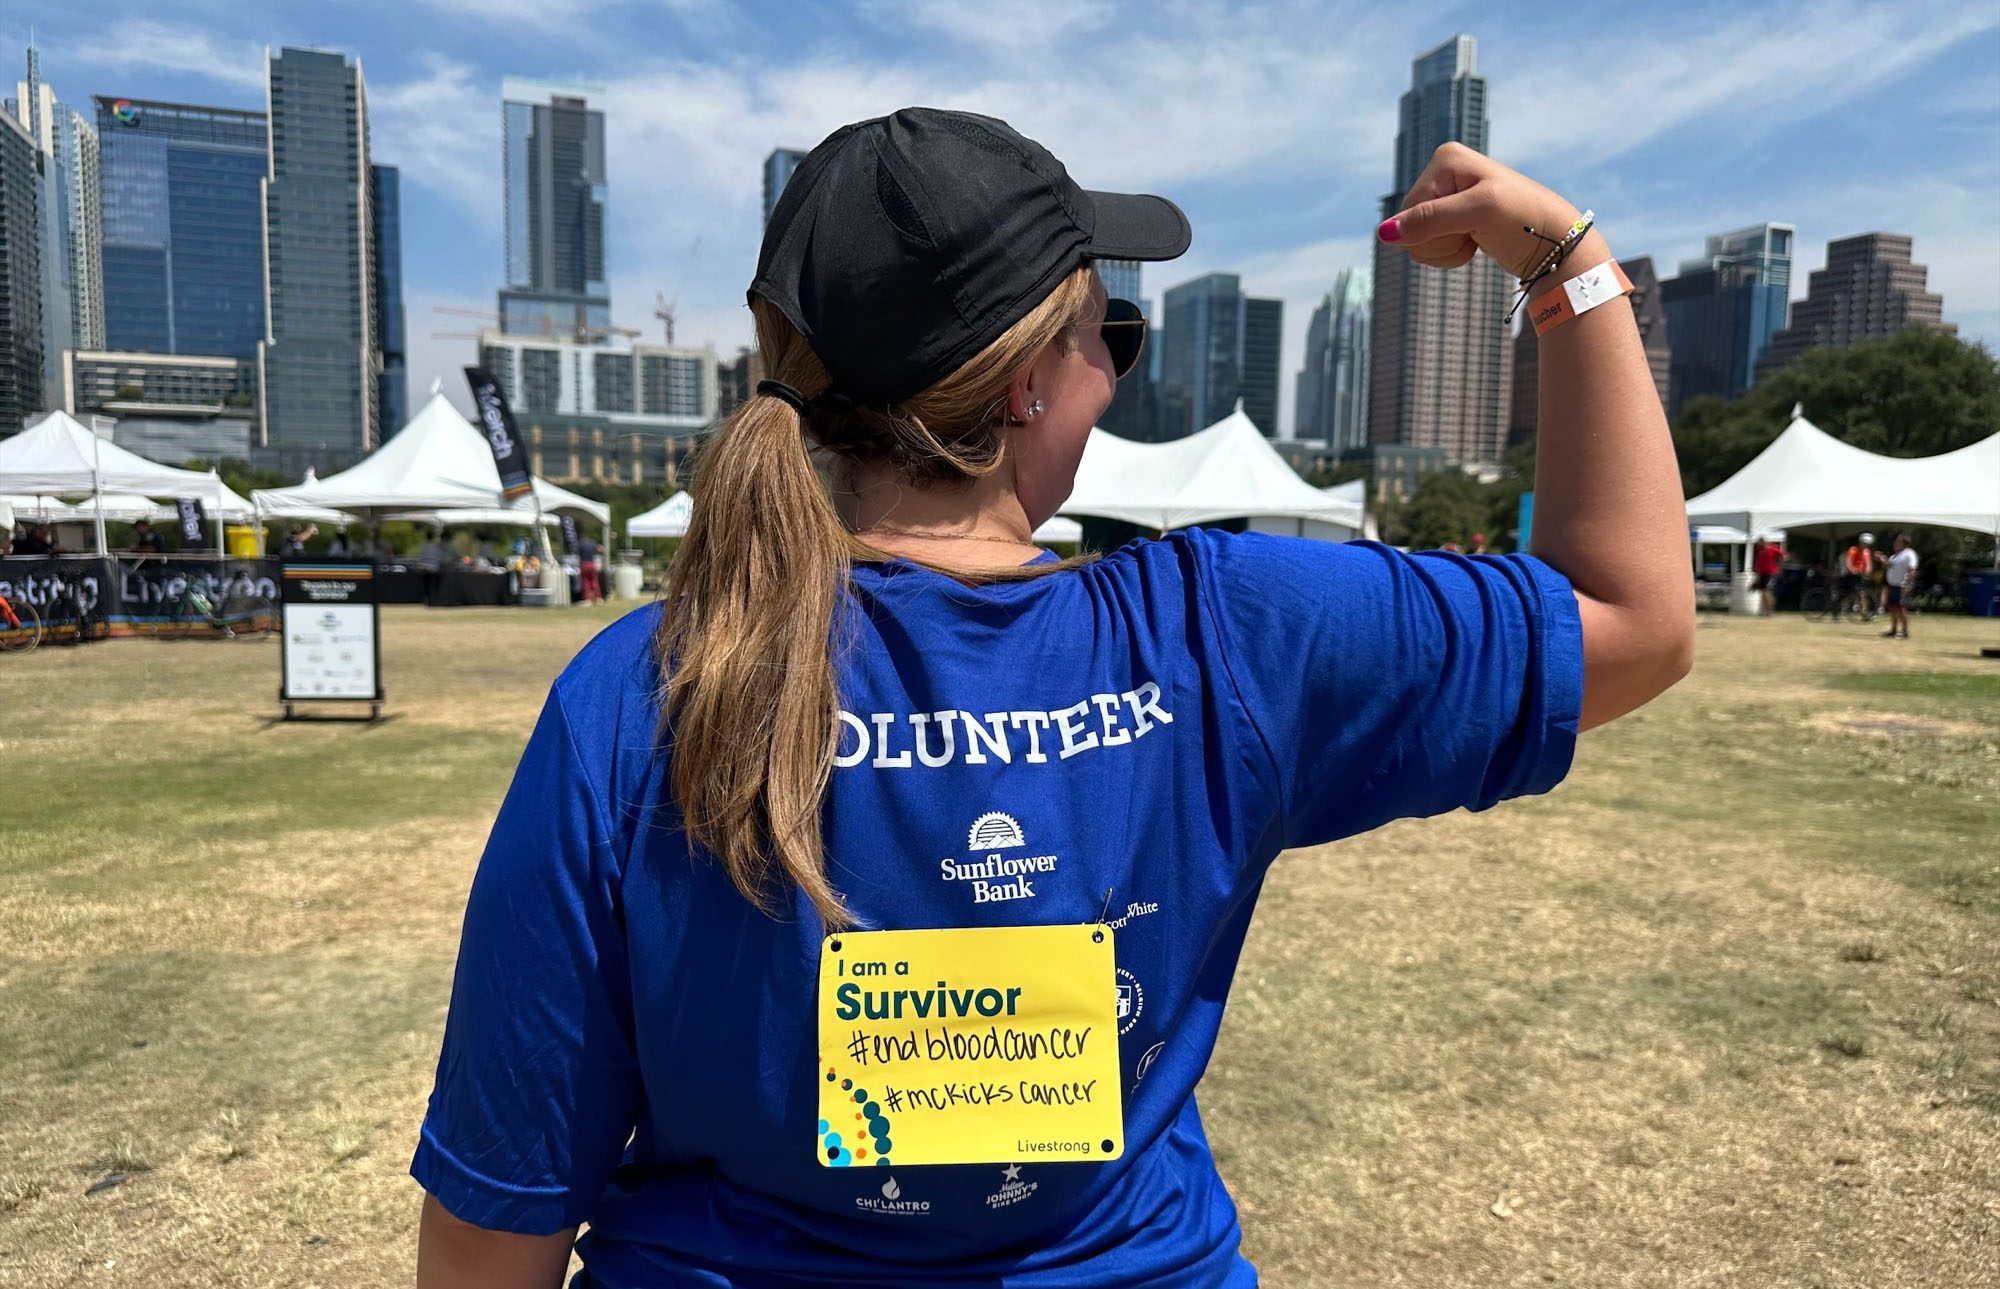 A young woman flexes her arm and displays a cancer survivor card on her back